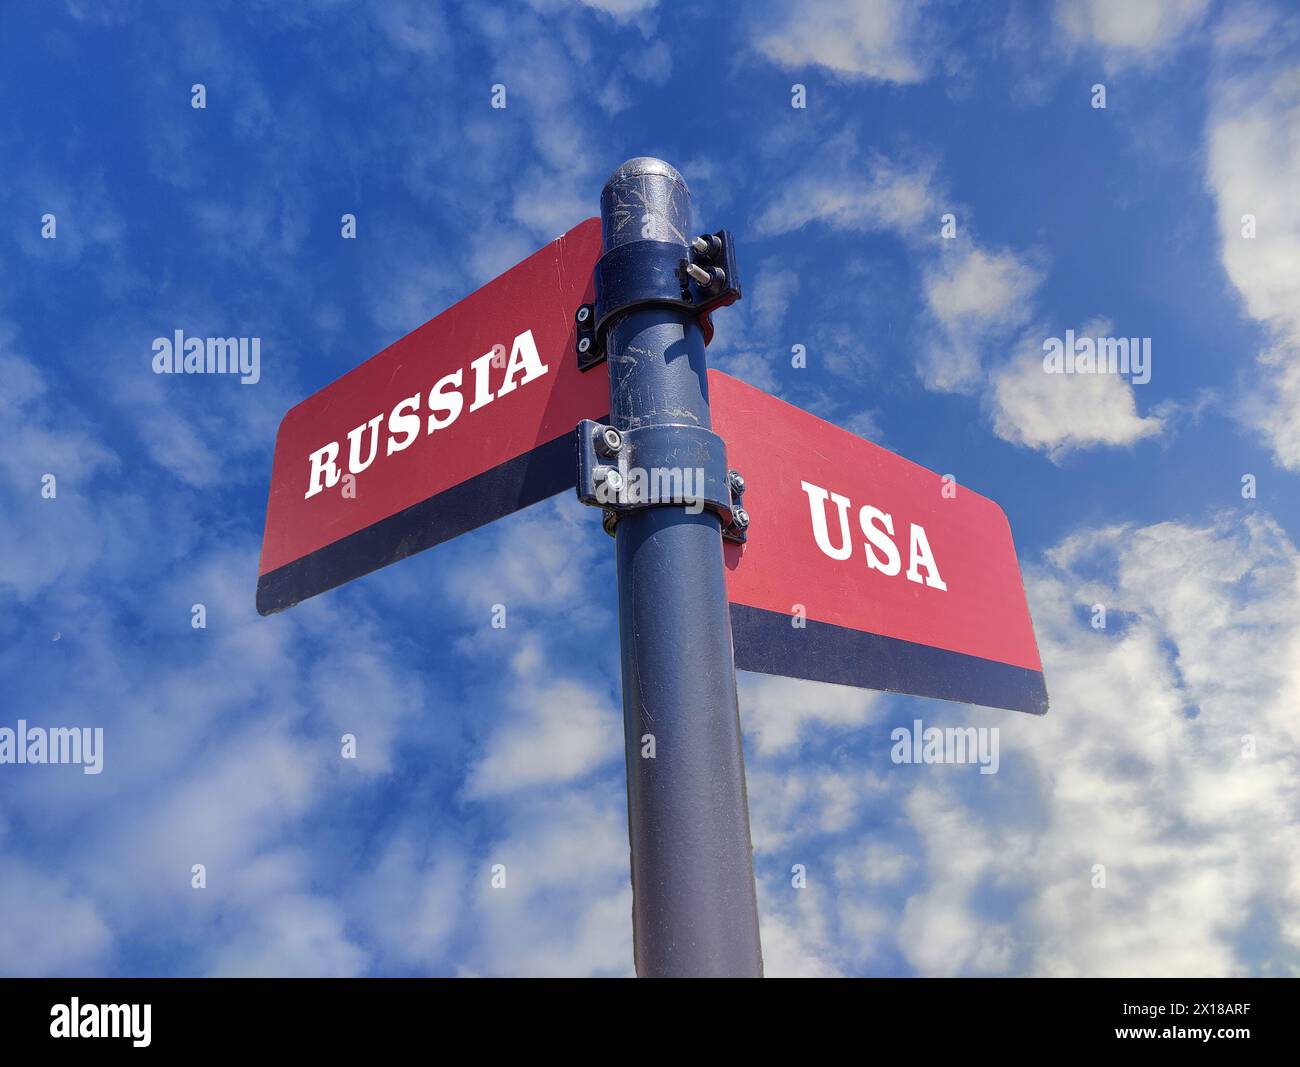 3d illustration, Red and black sign with the words Russia and USA written in white on the crossroads. Stock Photo